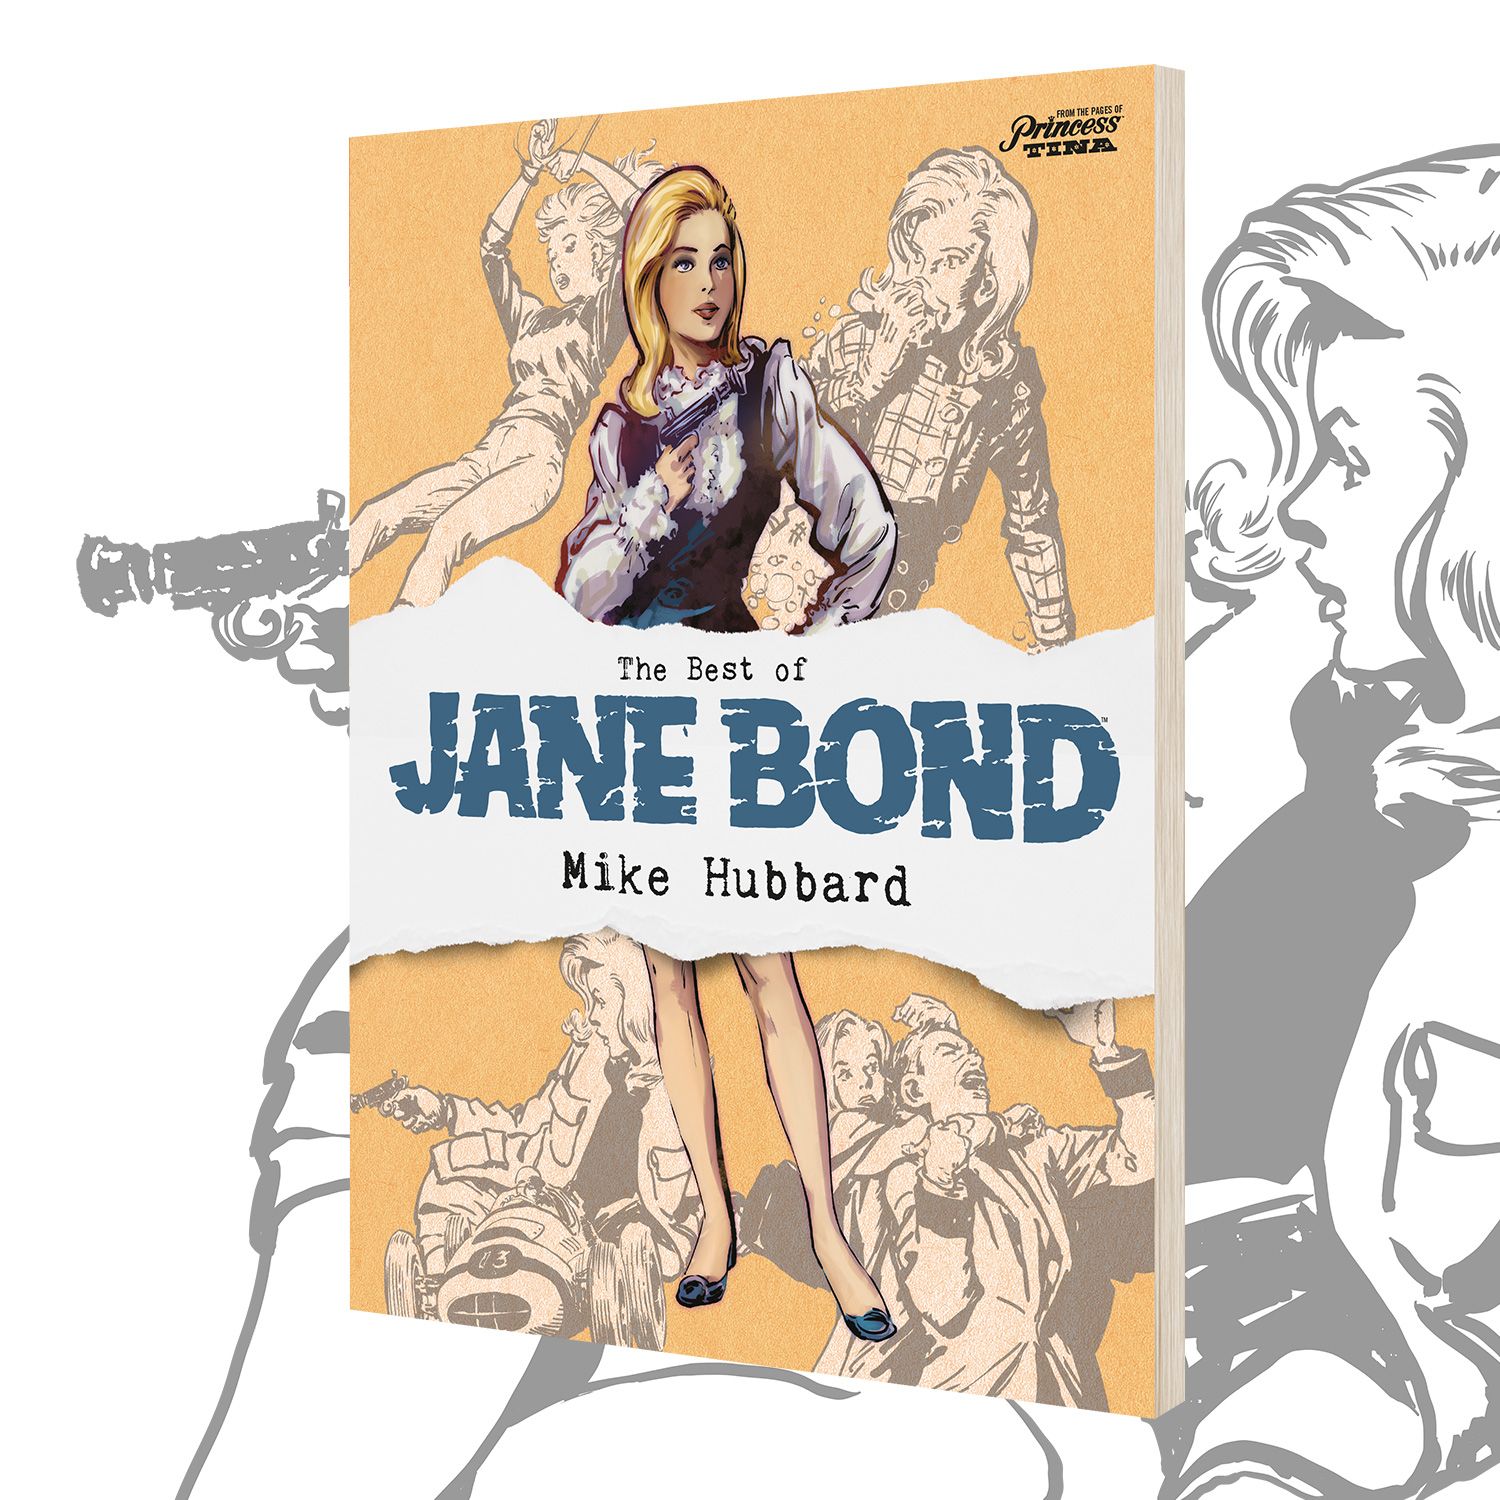 The name’s Bond … Jane Bond! New collection out now!